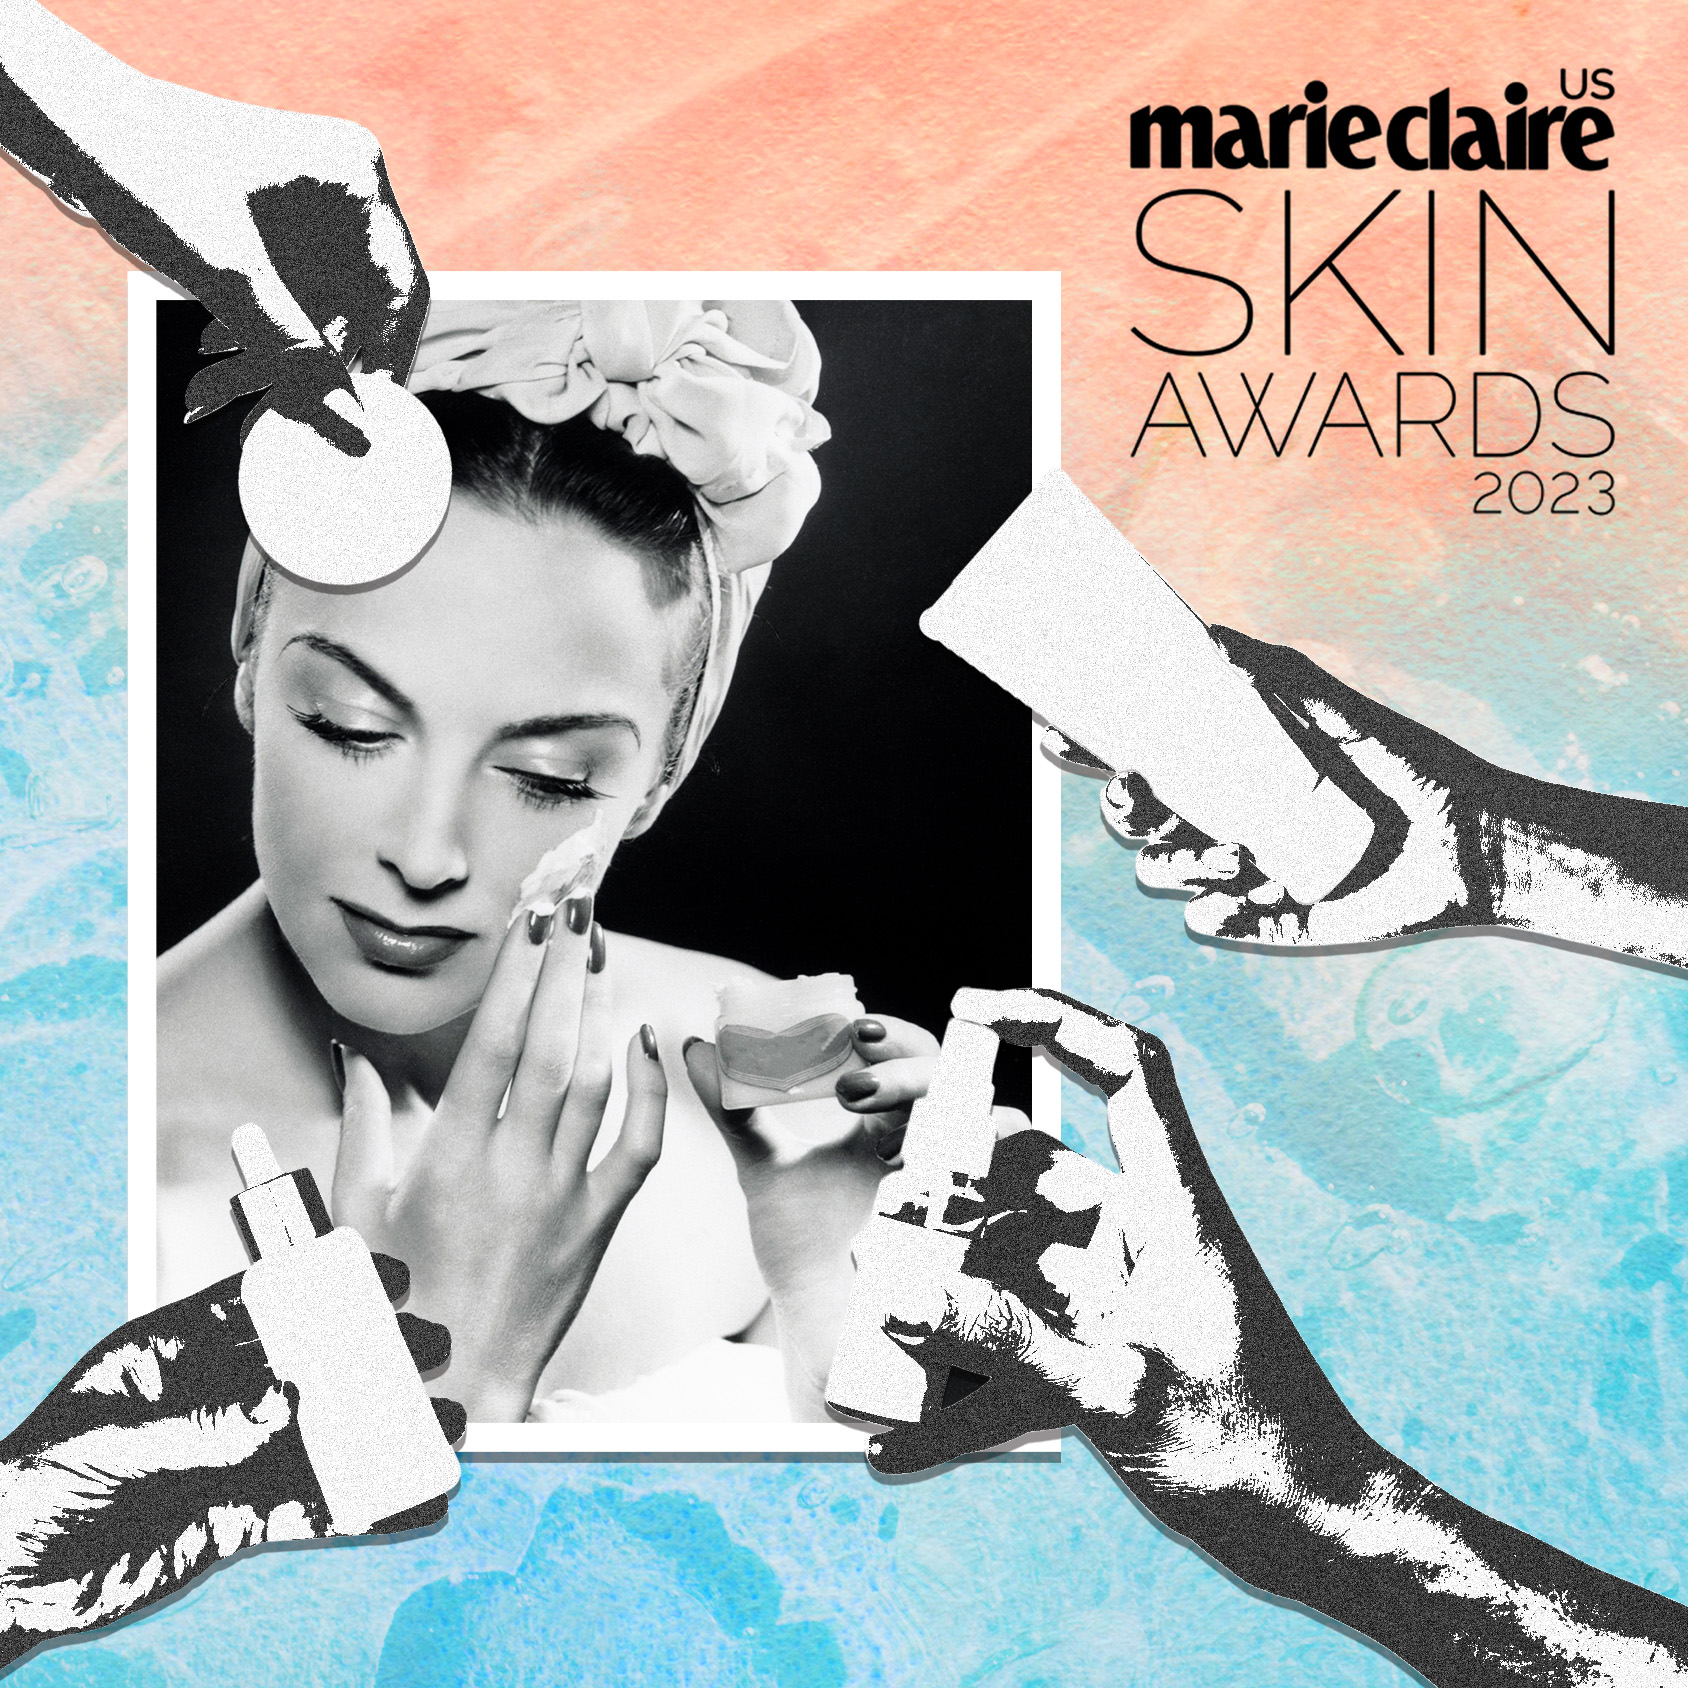 Introducing The 2023 Marie Claire Skin Awards